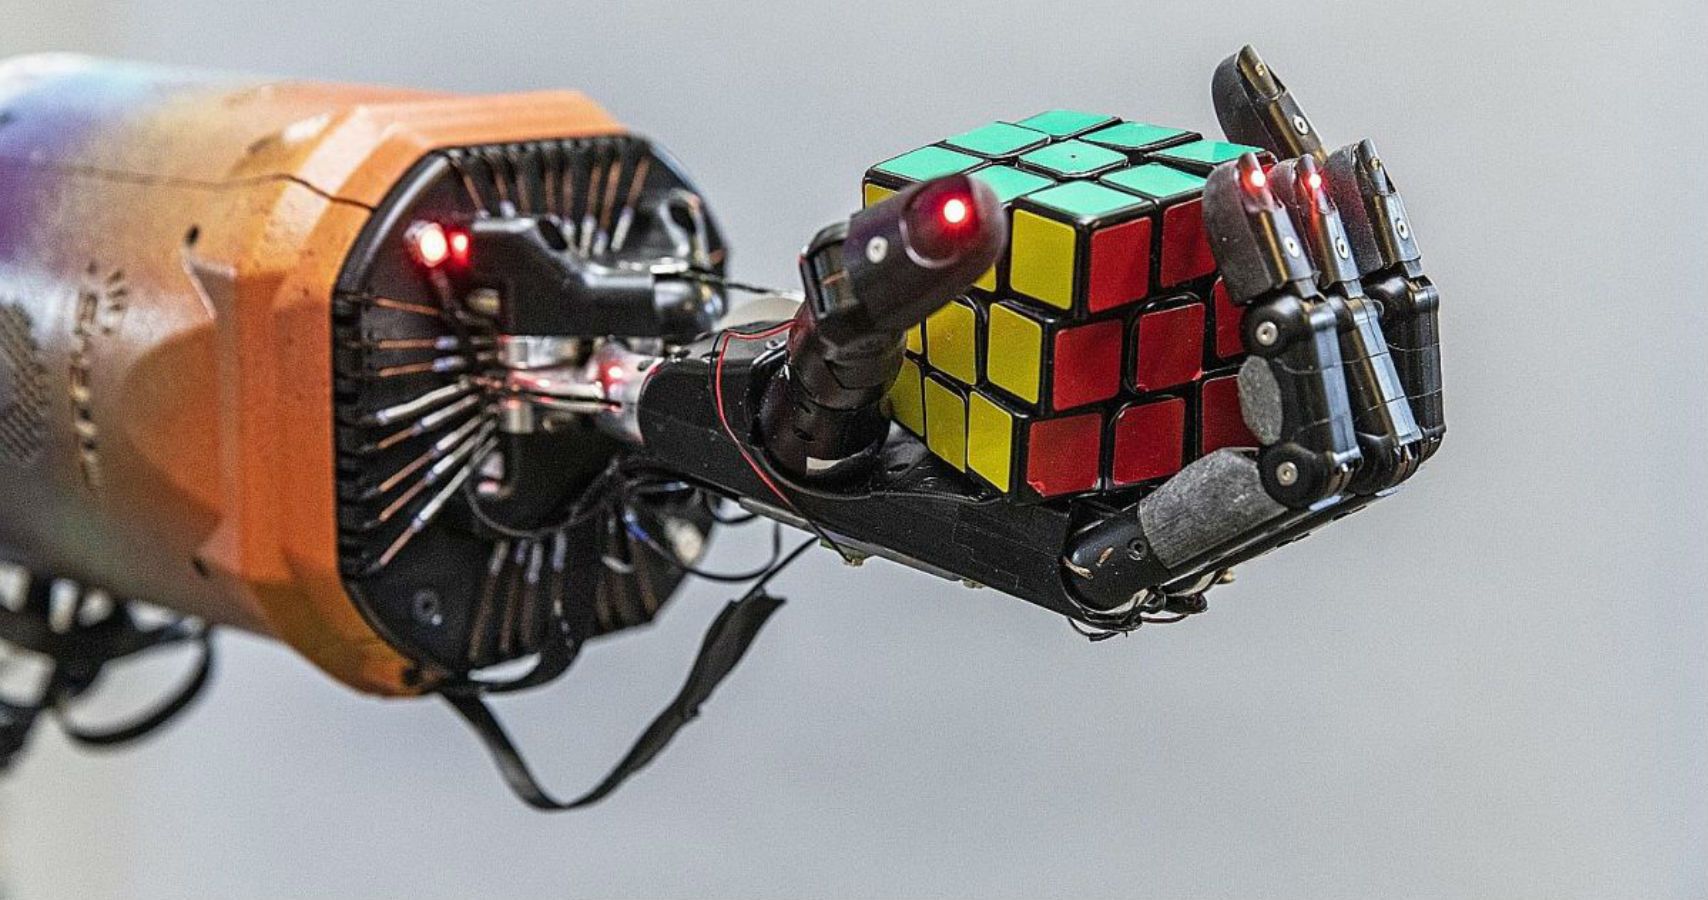 SEE IT: Robot solves Rubiks Cube with one hand - New York 